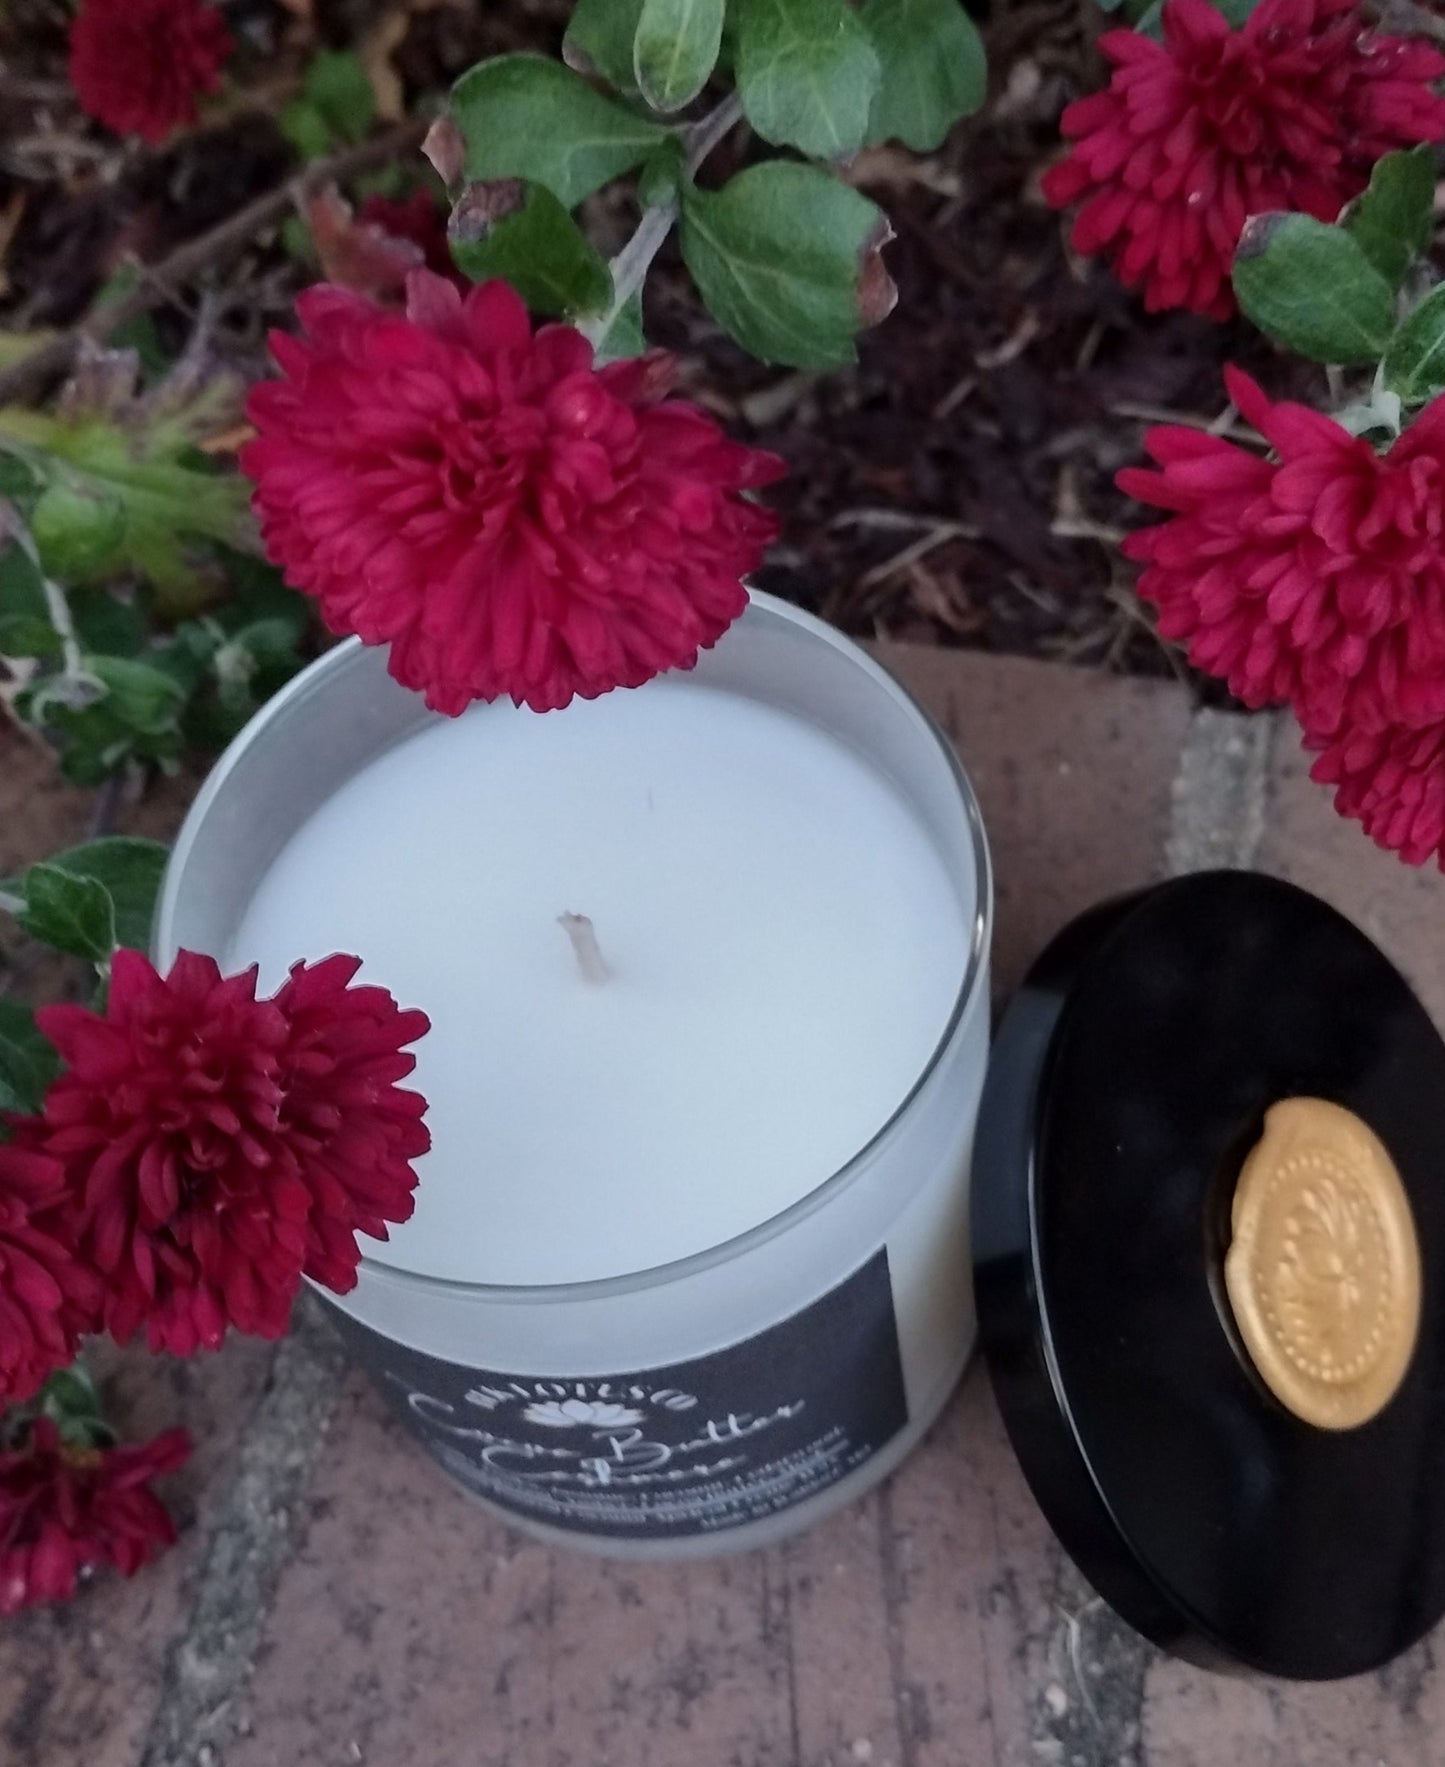 8oz Cocoa Butter Cashmere Delight: Hand-Poured Luxury Candle